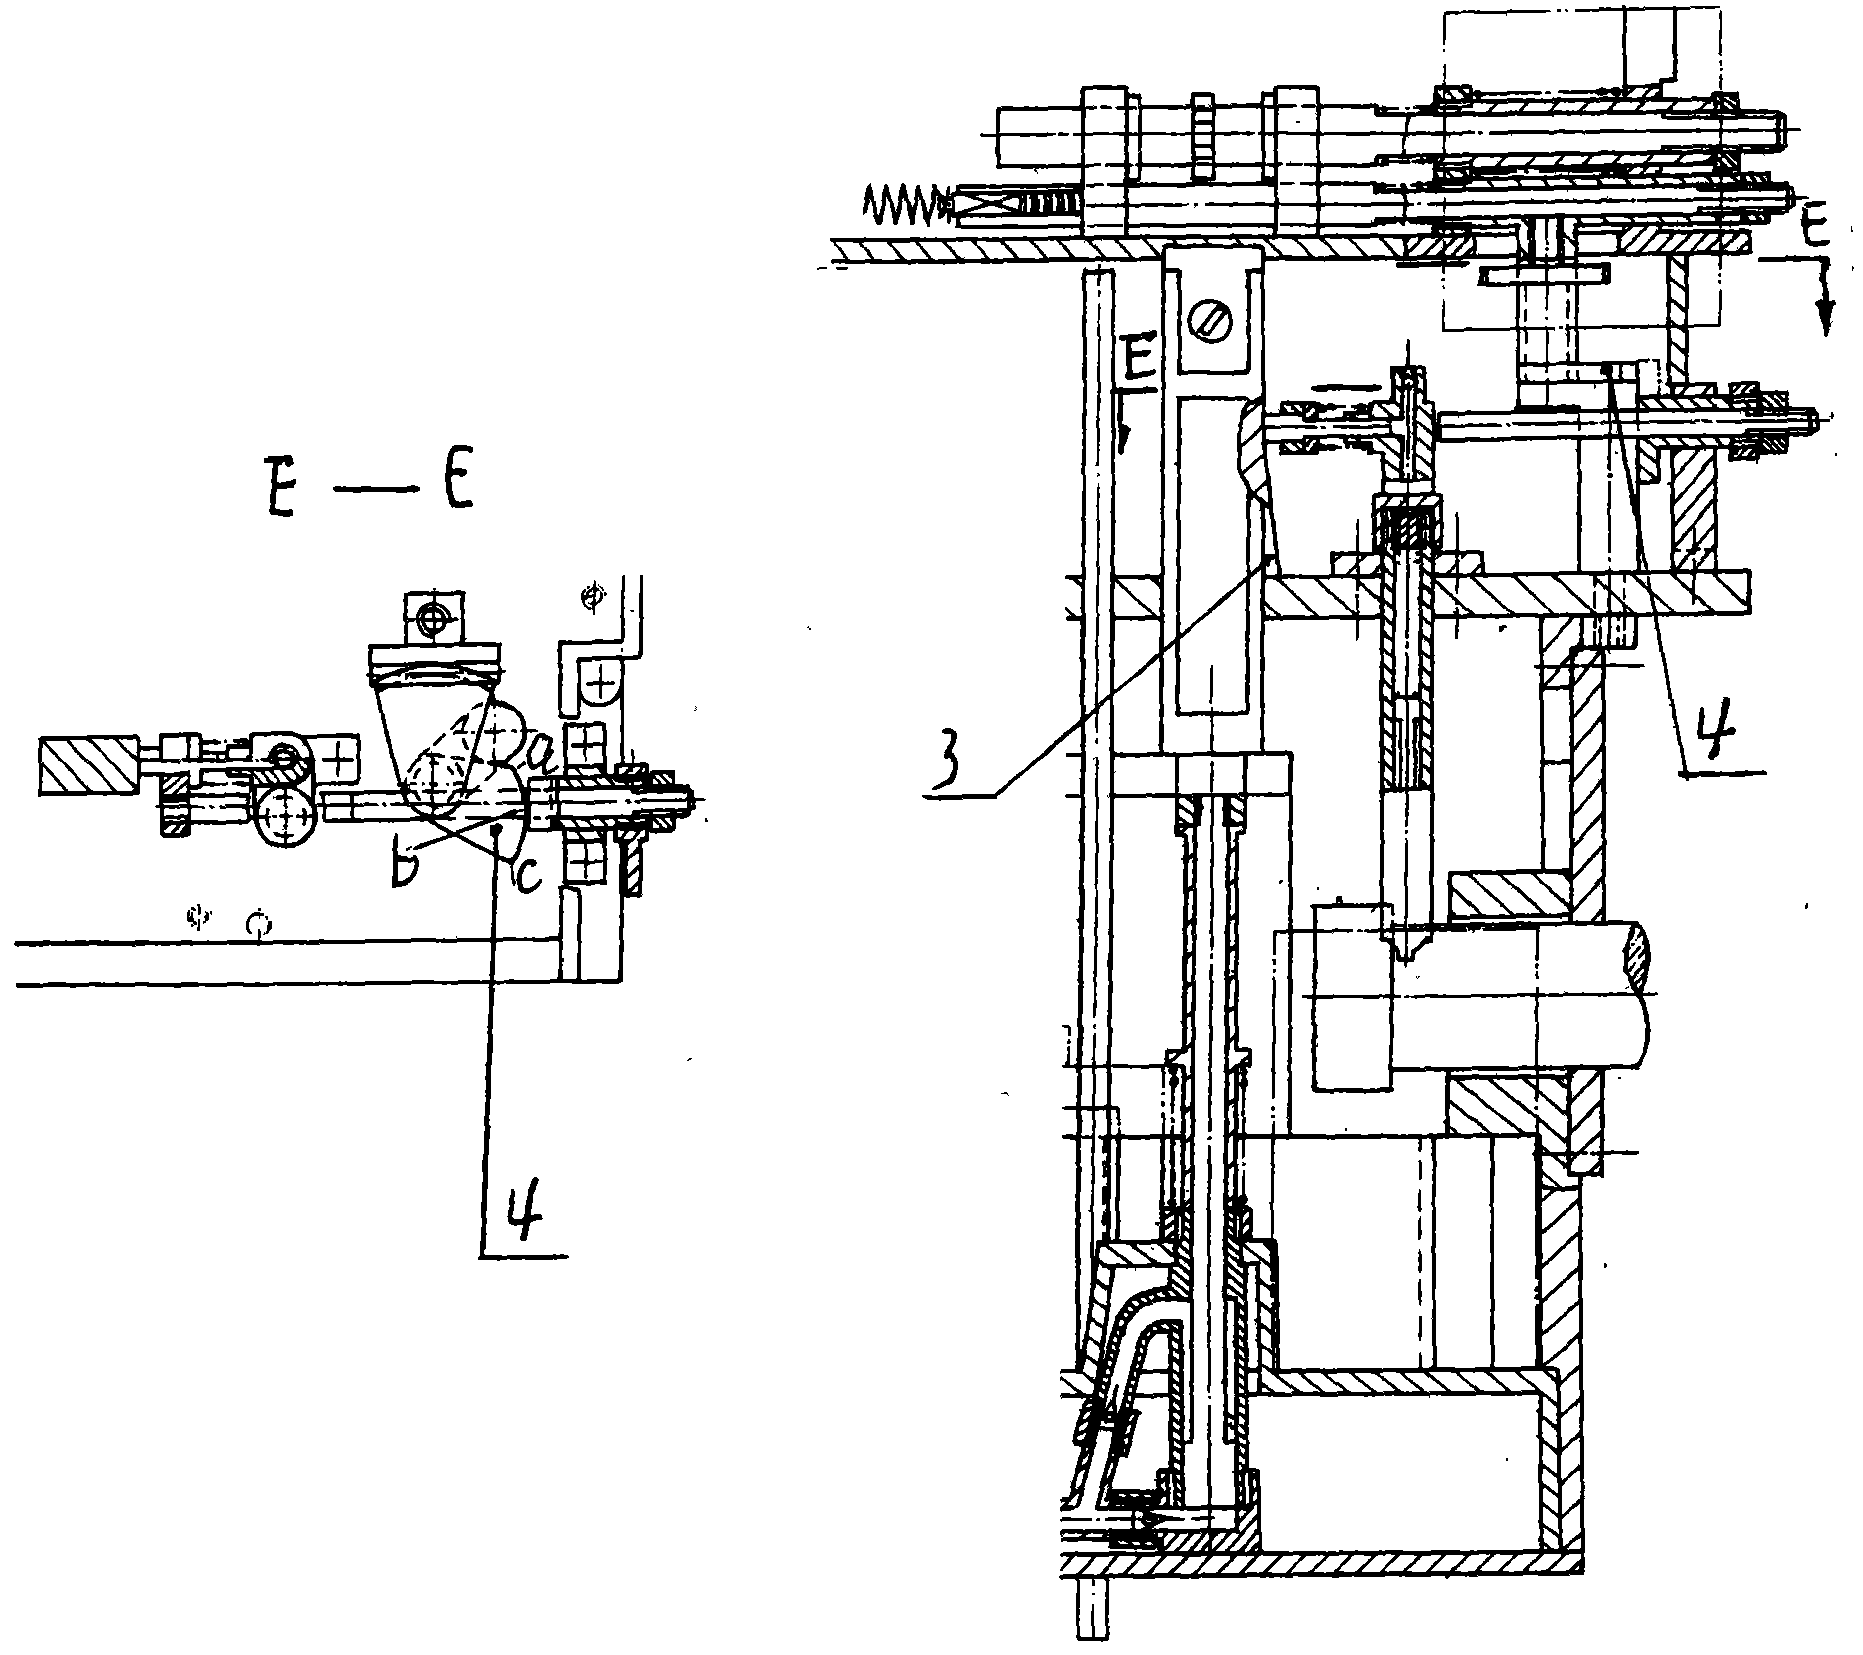 Water spraying cooling system of piston reciprocating internal combustion engine